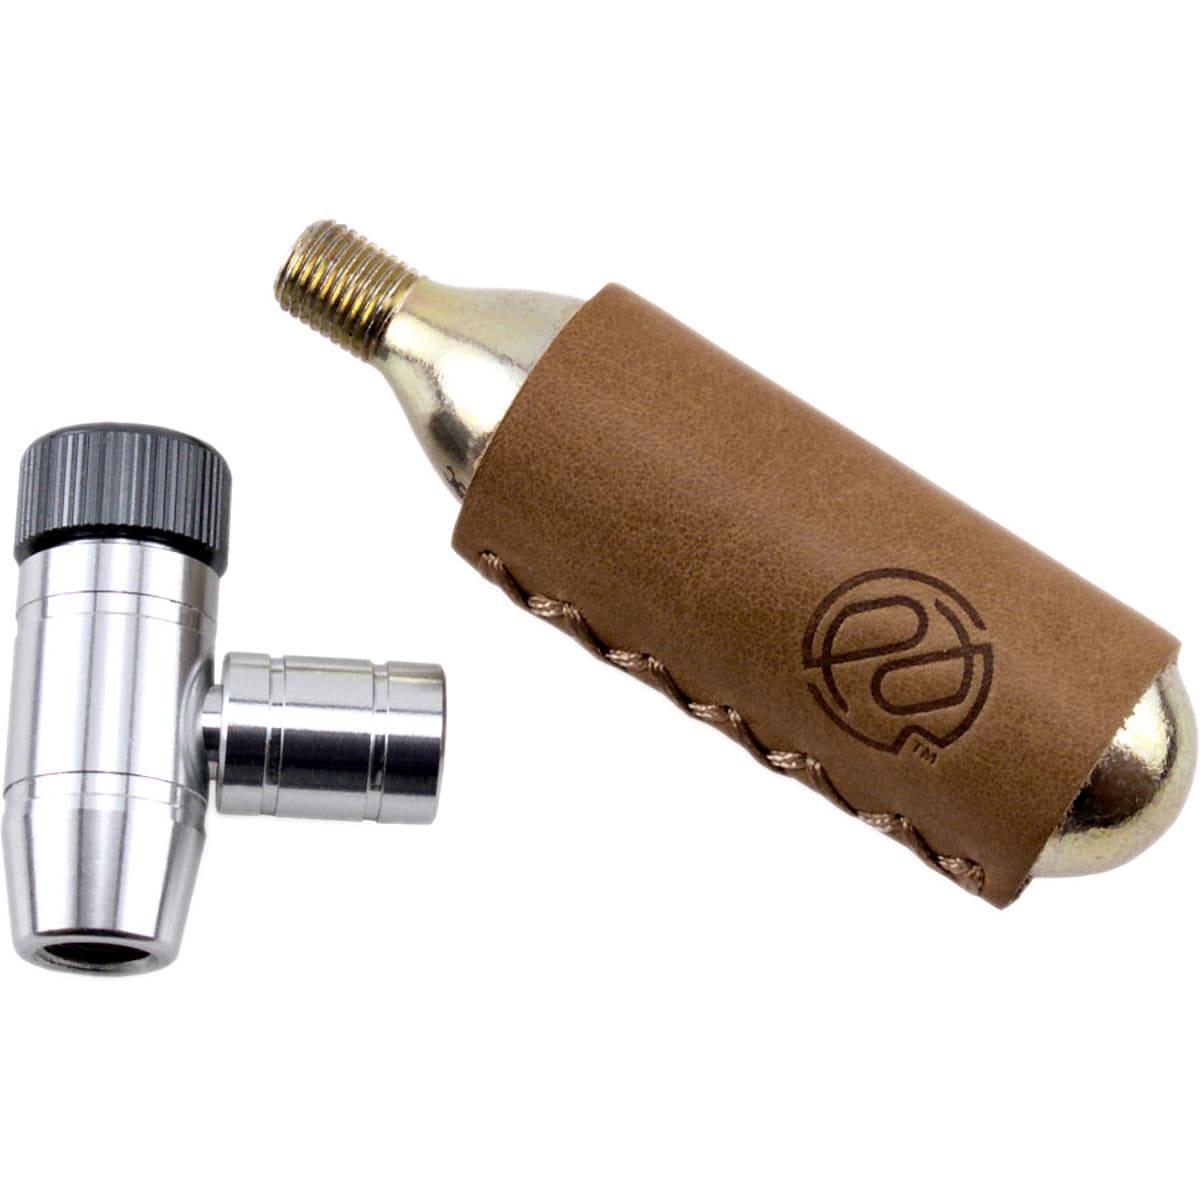 Portland Design Works Shiny Object CO2 Inflator + Leather Sleeve & Cartridge One Color, One Size